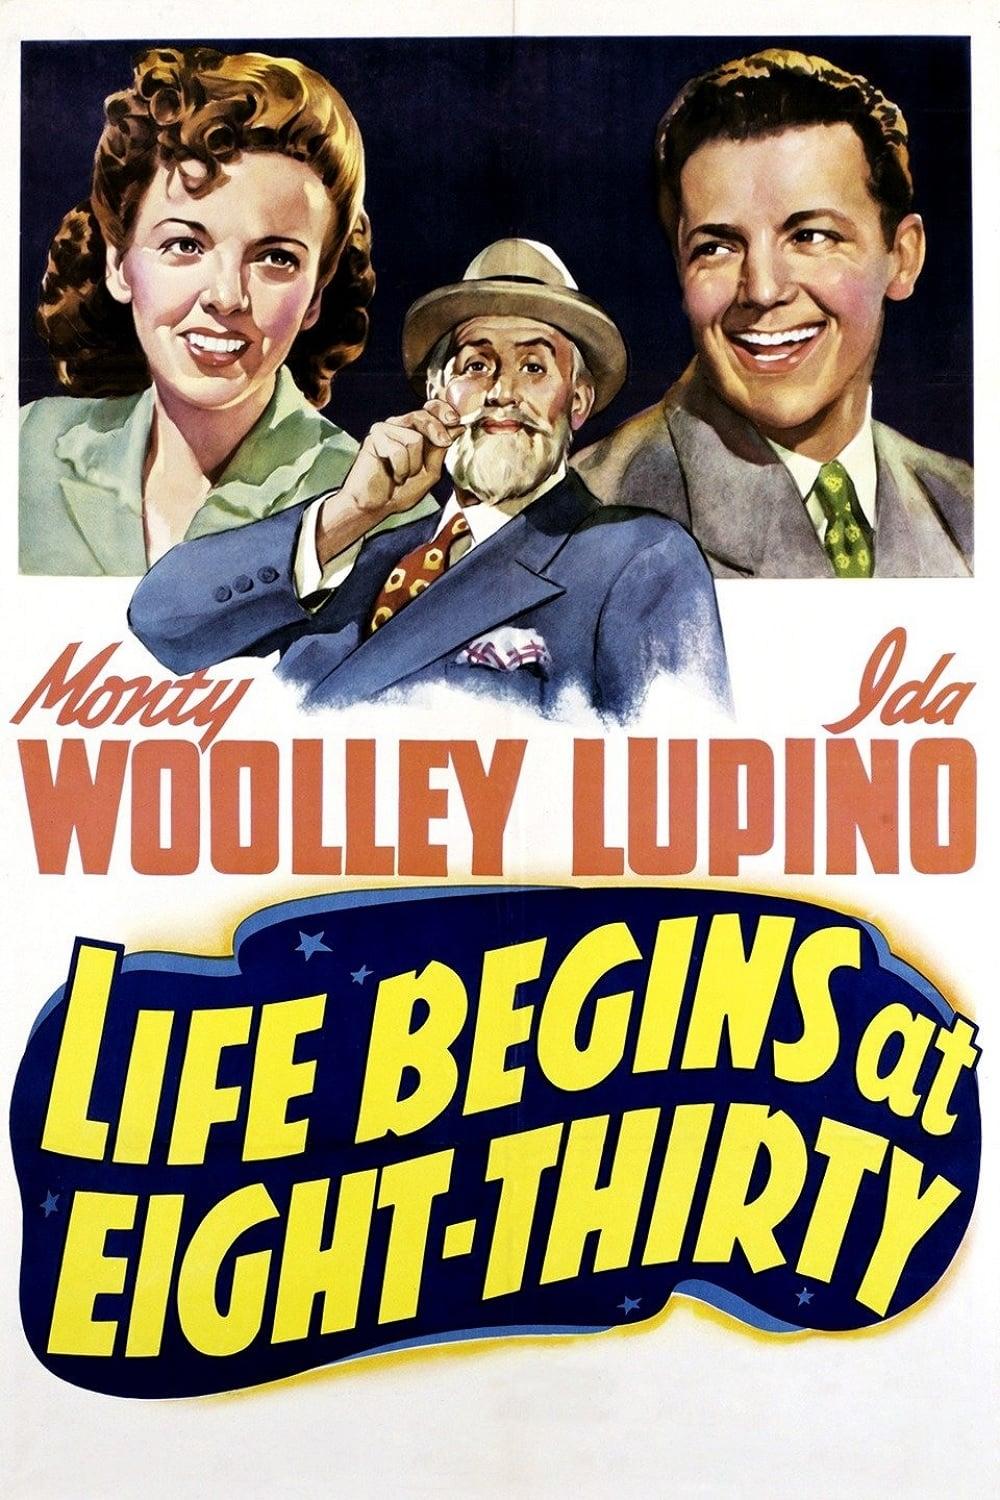 Life Begins at Eight-Thirty poster